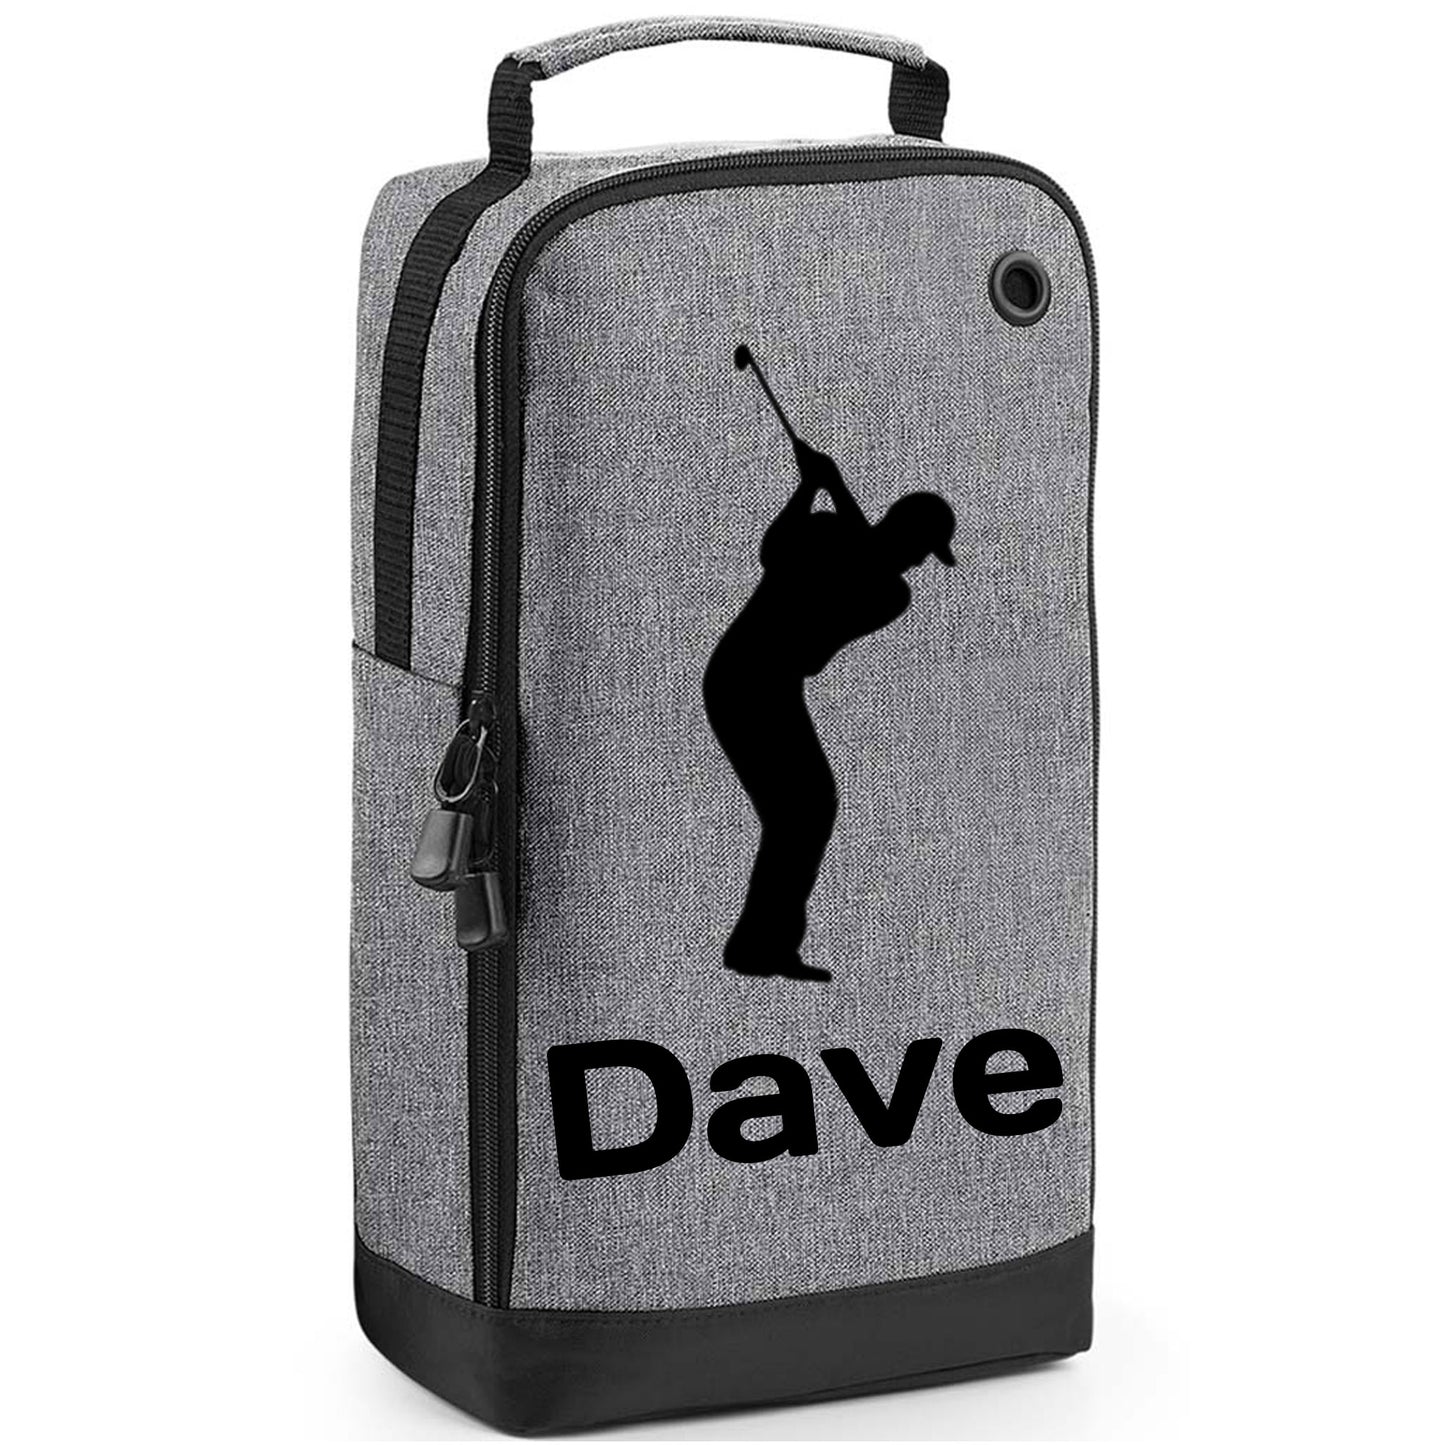 Personalised Golf Shoe Bag with Male Golfer & Name or Initials  - Always Looking Good - Grey  